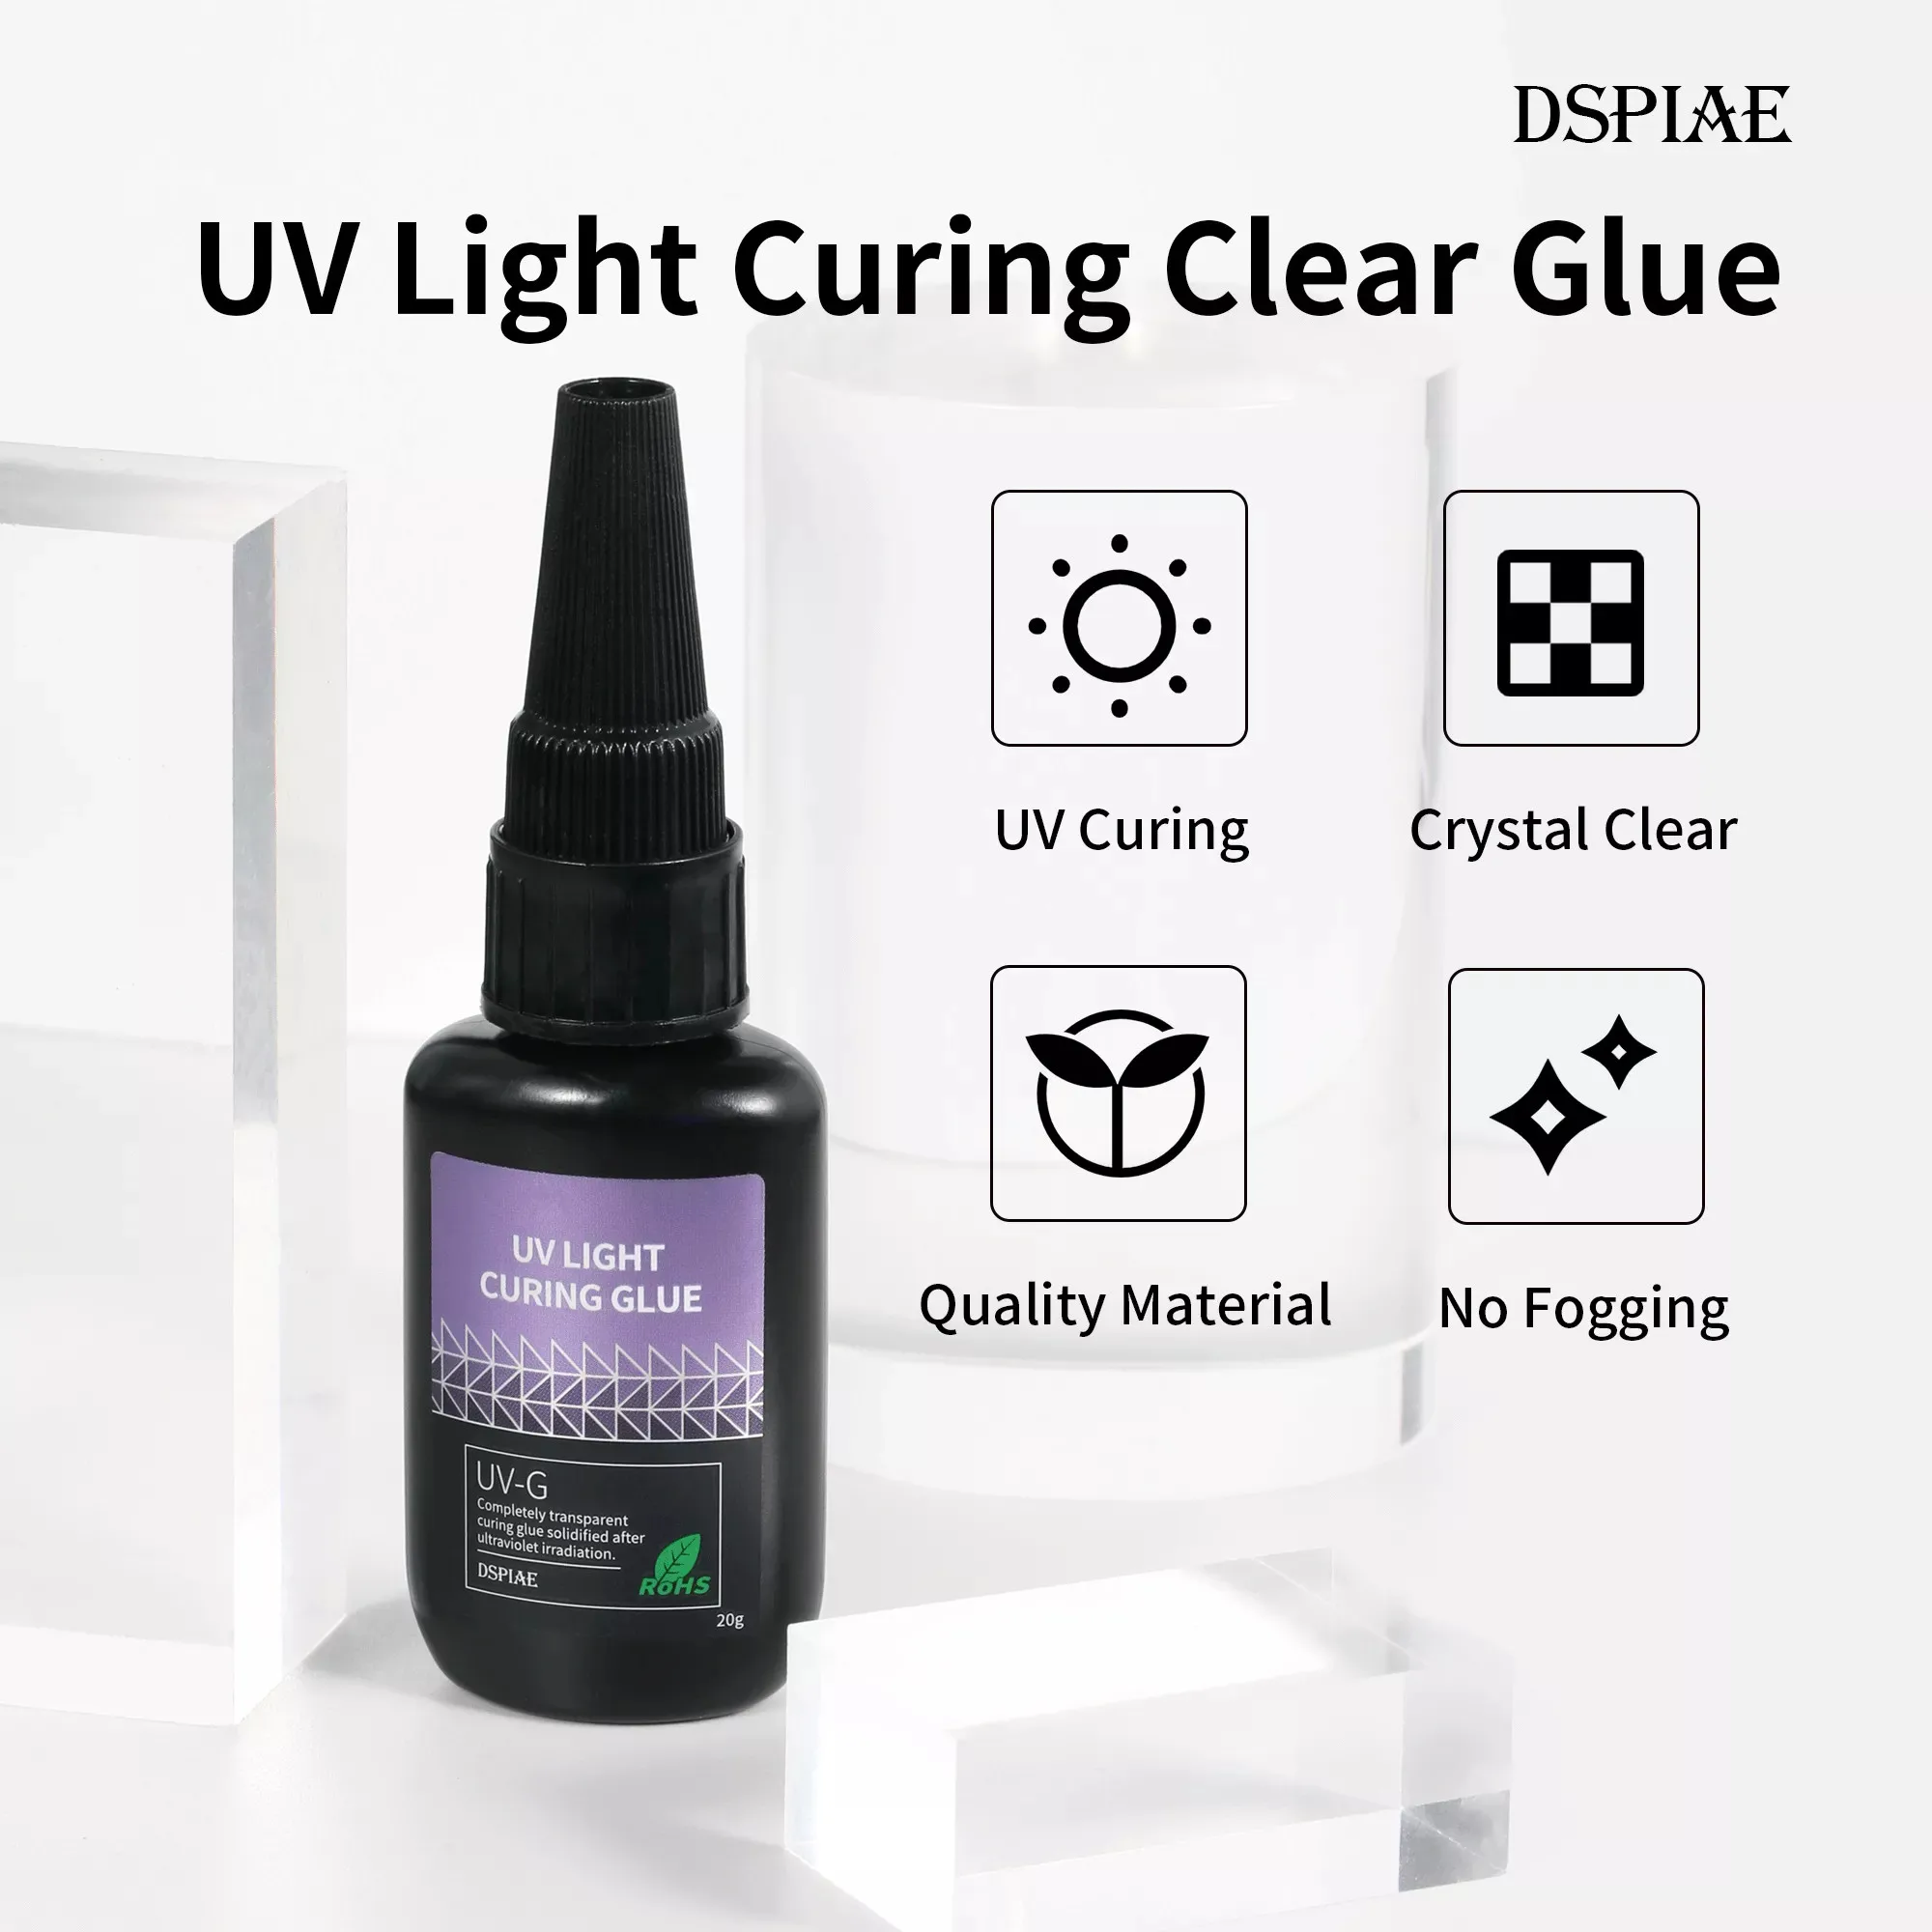 Our UV light glues - Advantages of UV curing adhesives in industry